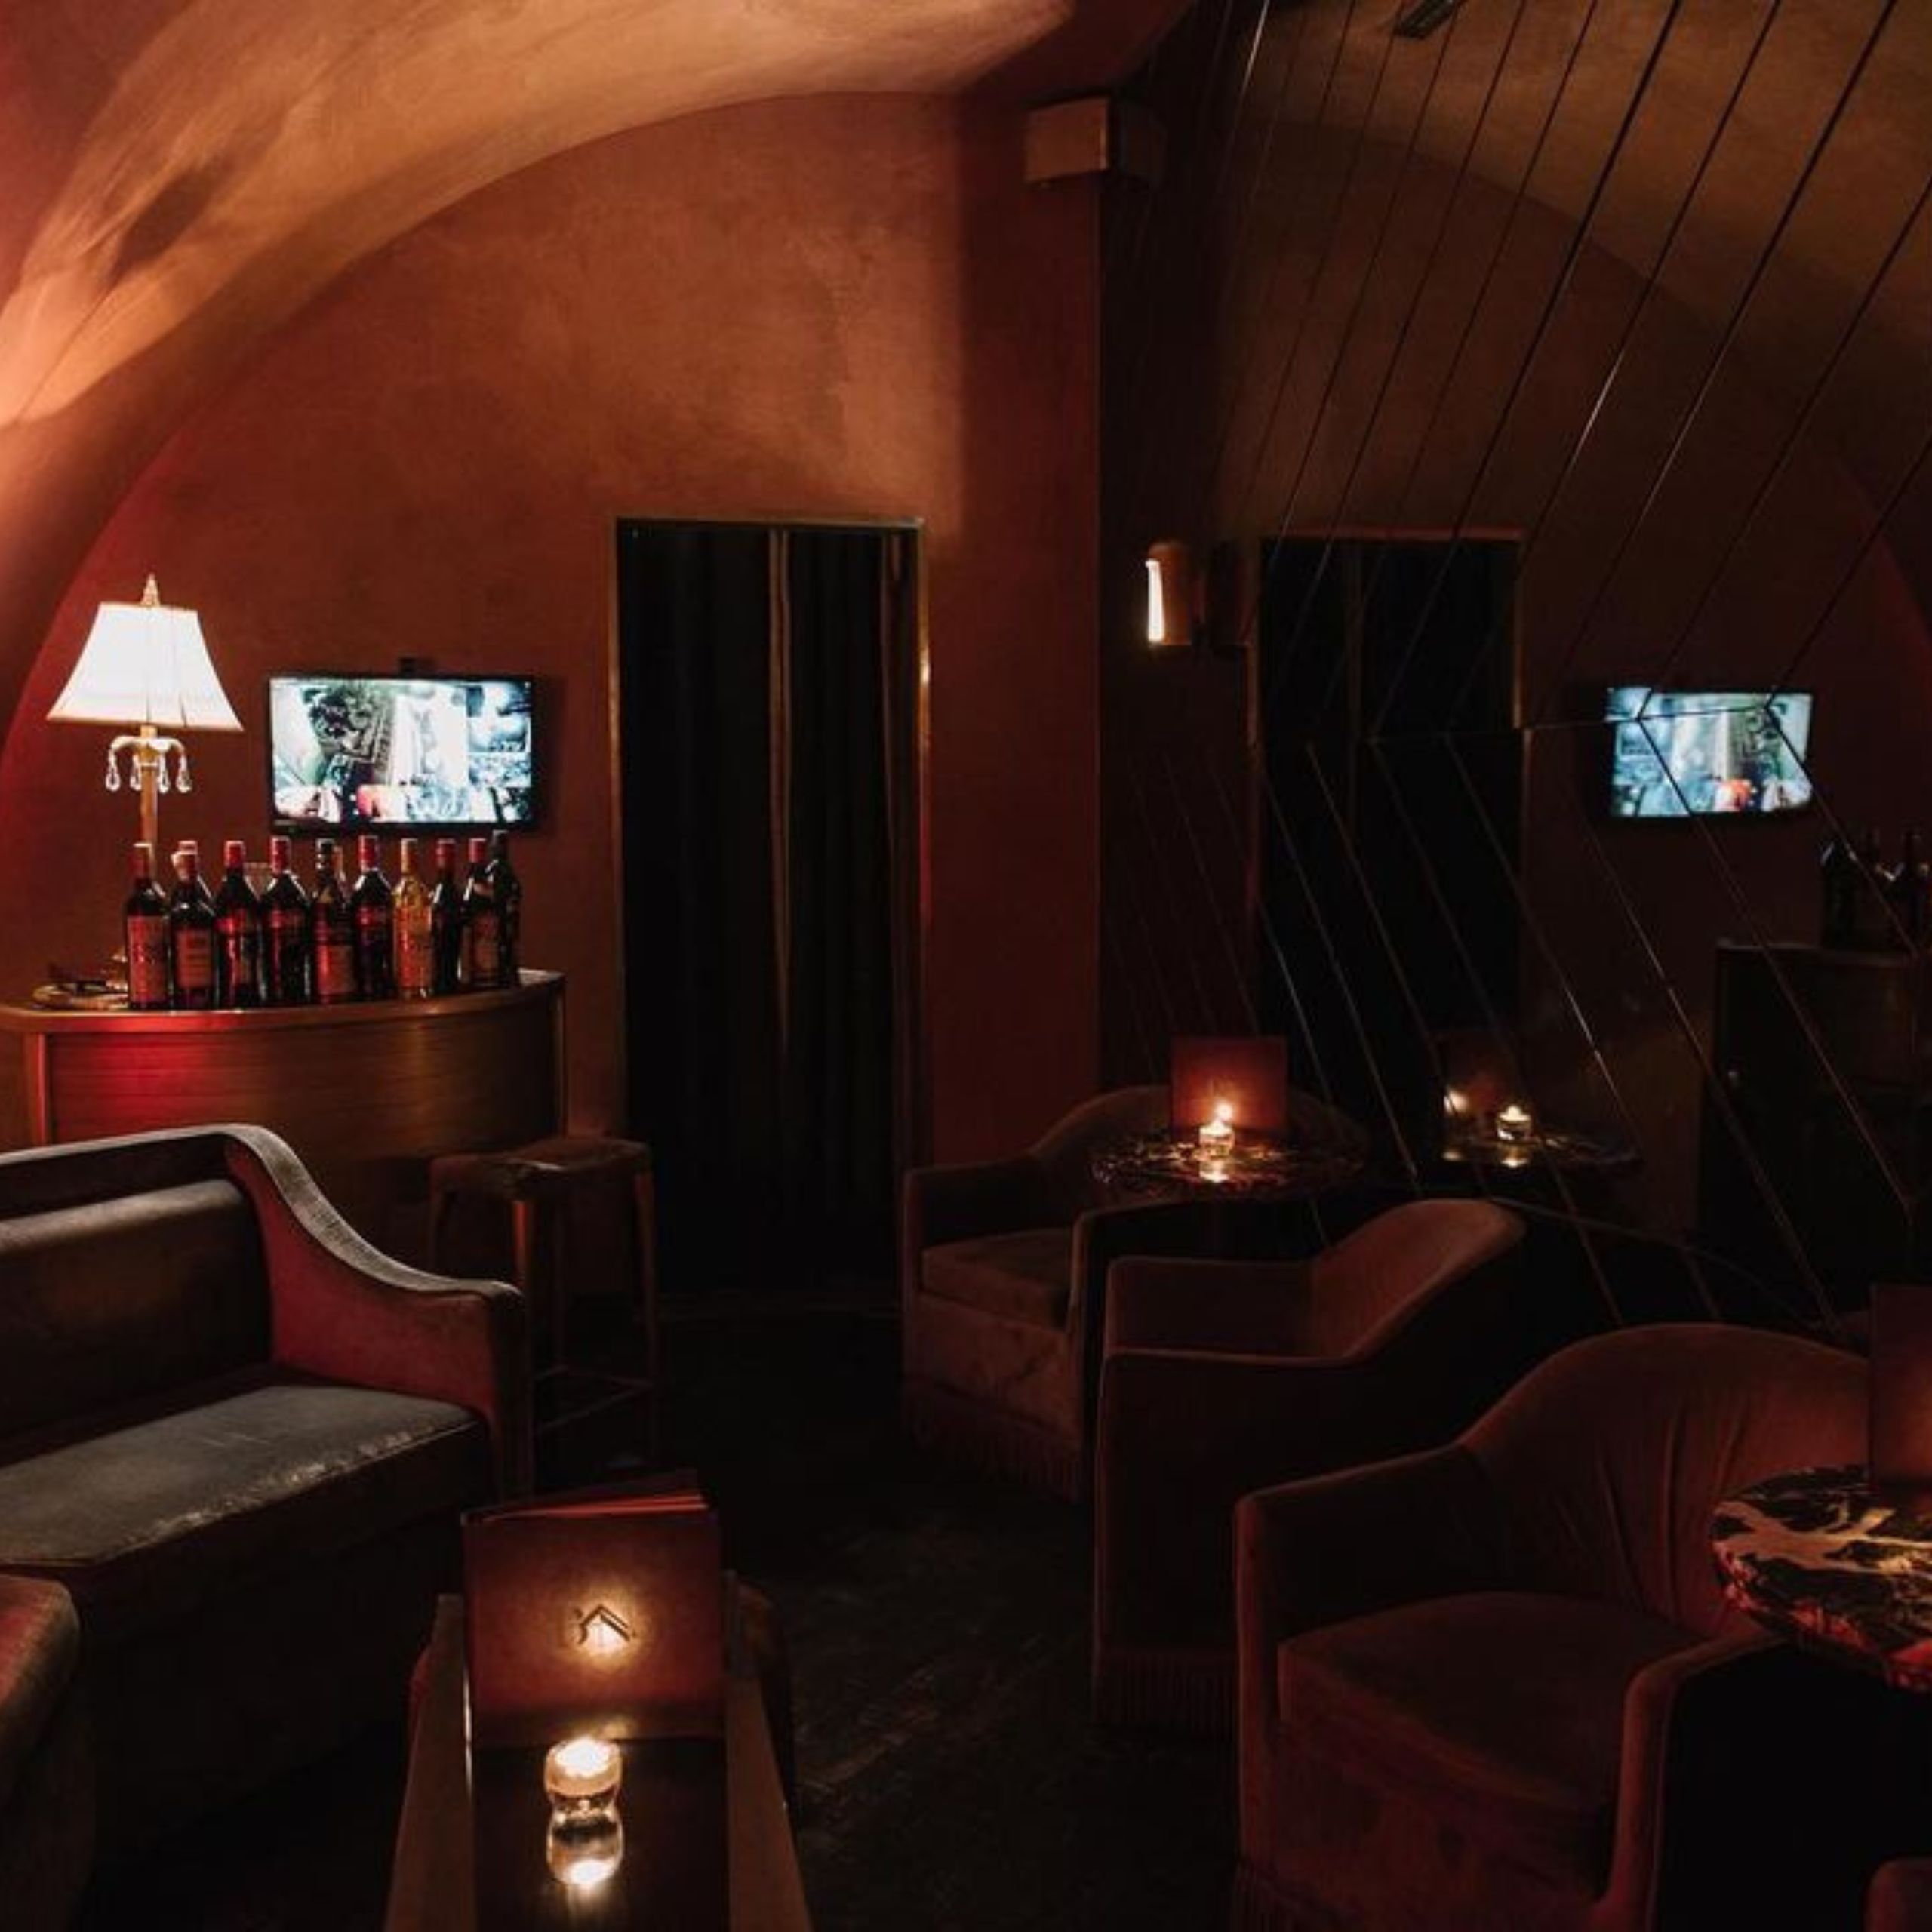 Sipping in Silence: The Presence of Speakeasy Bars in the Country